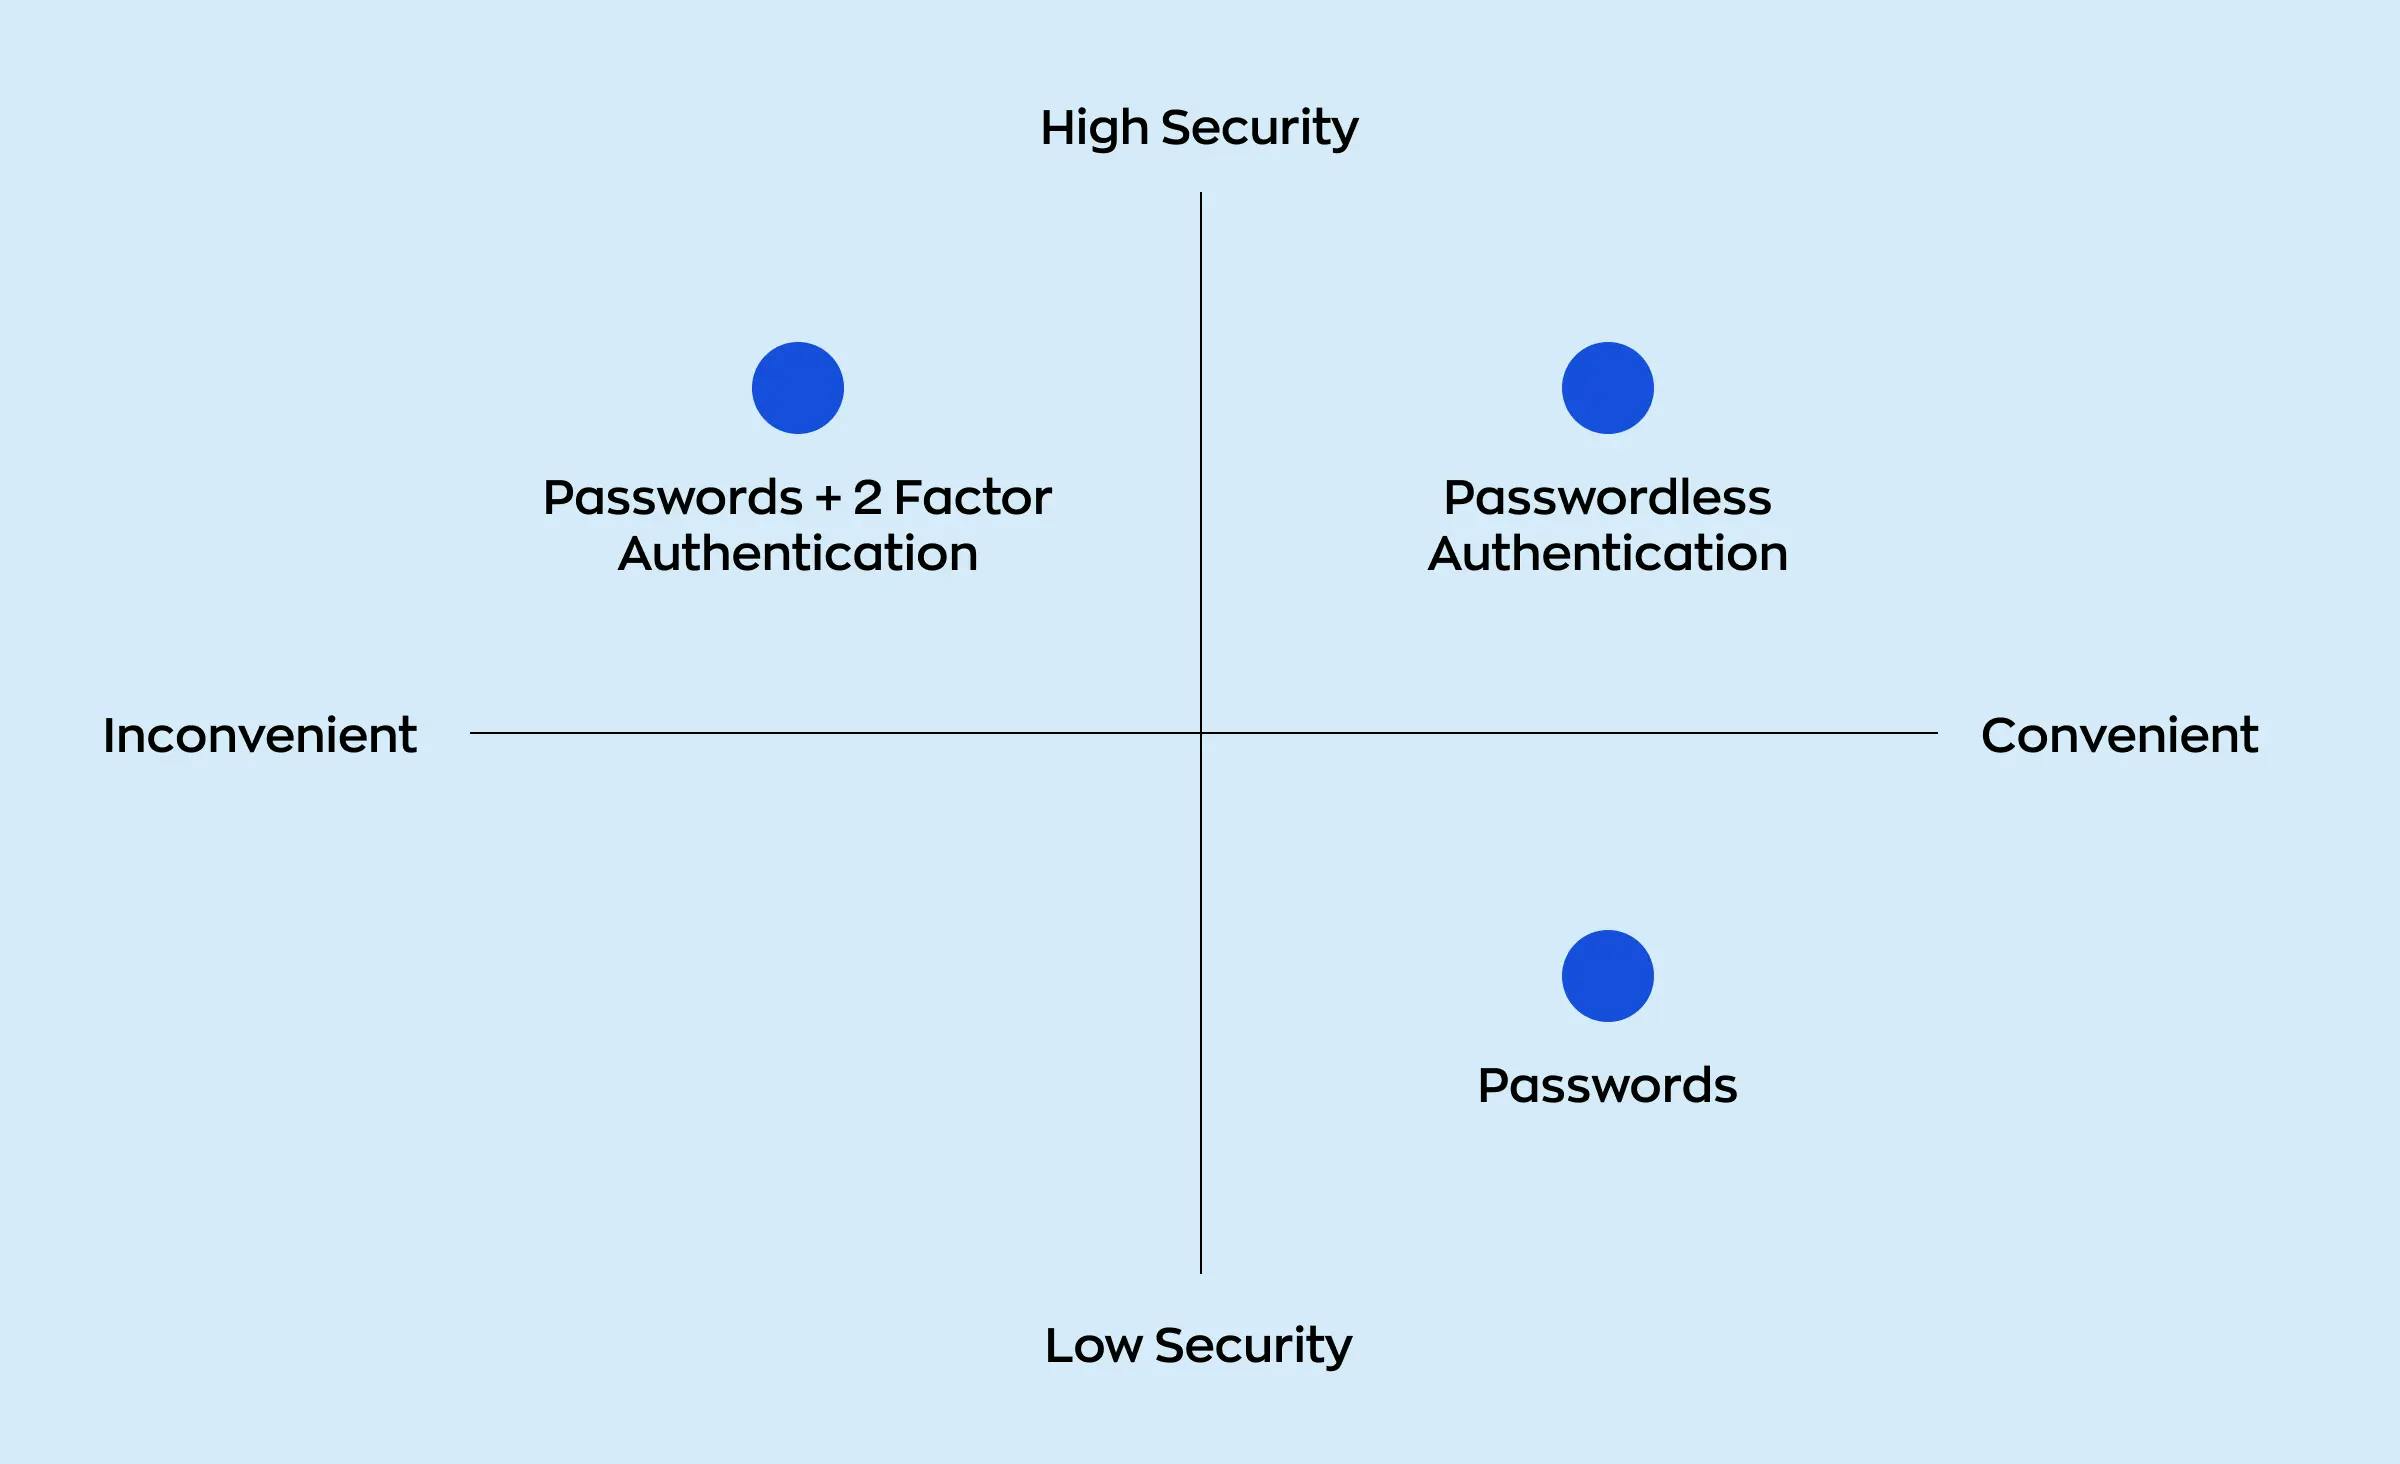 A vertical axis indicates high and low security, while a horizontal axis indicates the level of inconvenience and convenience of a banking app security measure. On this scale, passwords and two-factor authentication are less convenient but offer higher security. Passwords have lower security but are more convenient, and passwordless authentication offers both high security and convenience.